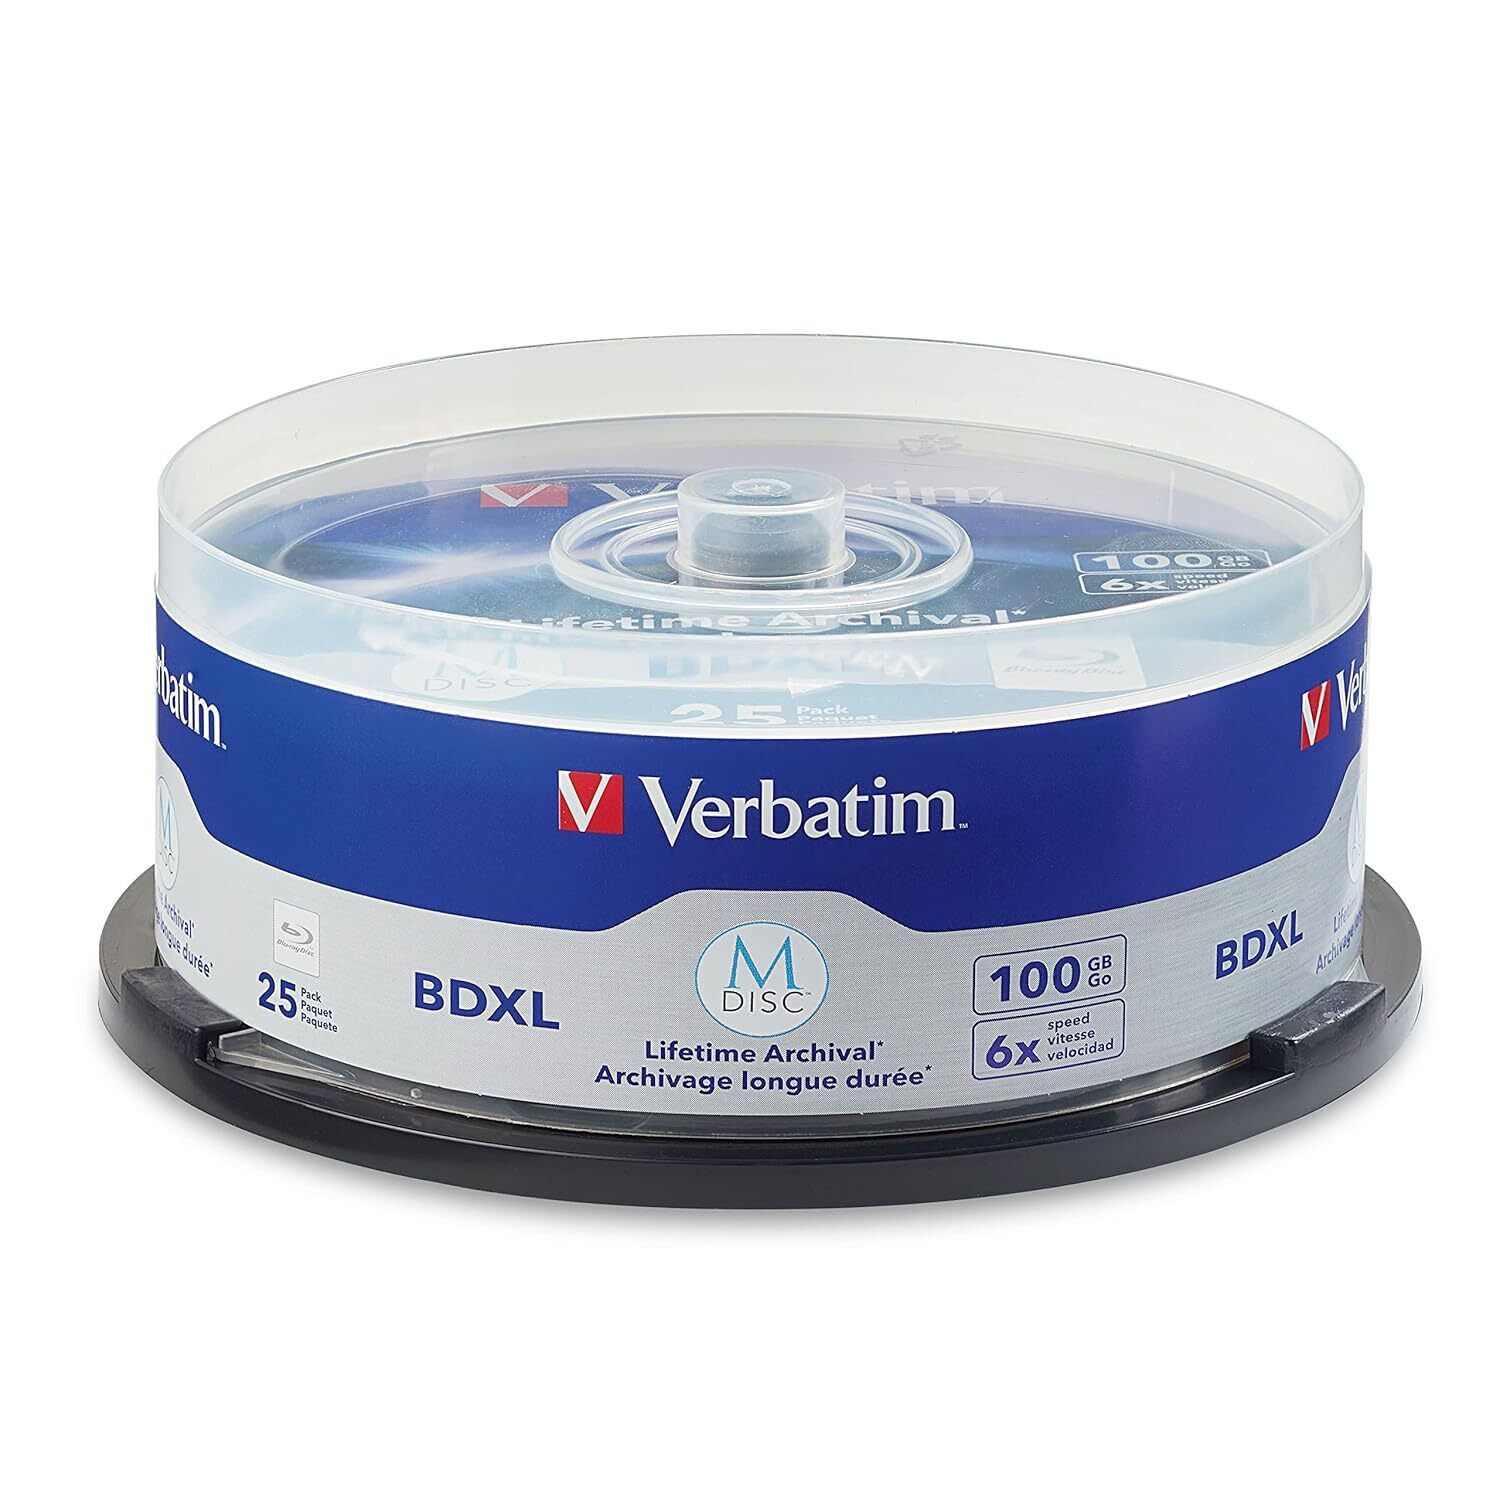 Verbatim M DISC BDXL 100GB 6X with Branded Surface � 25pk Spindle